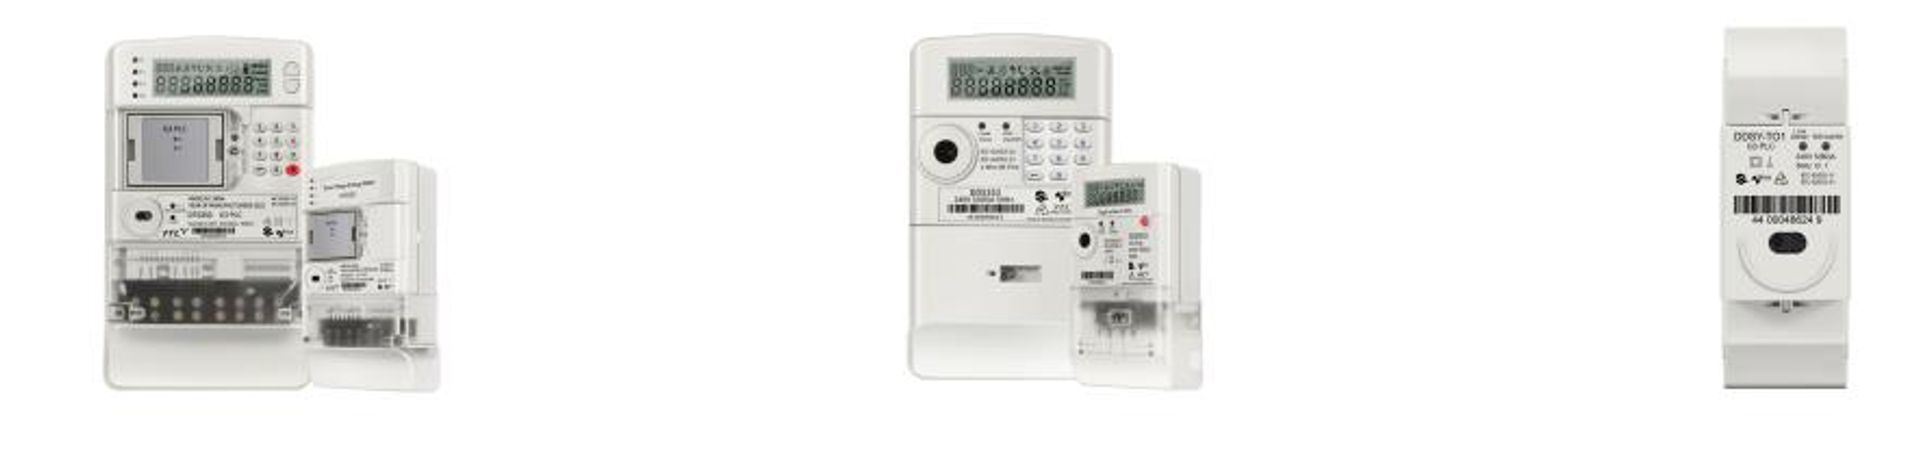 Huge growth in the energy meter market in four years, are you ready?-2